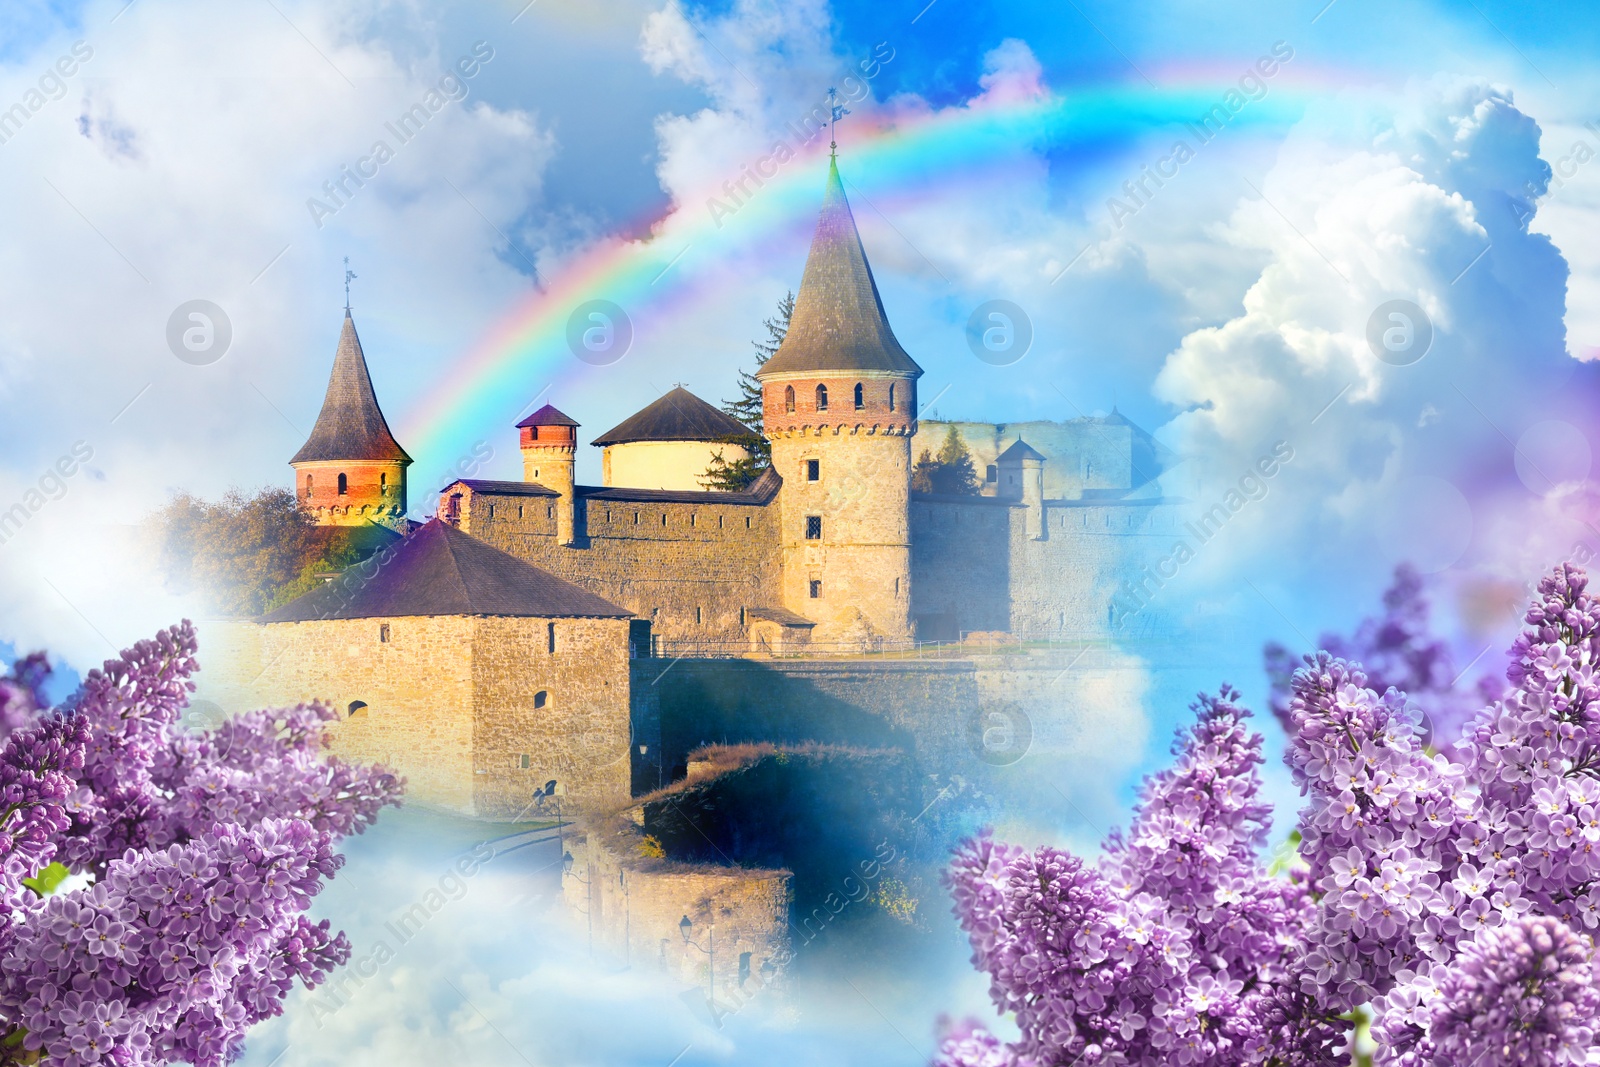 Image of Fantasy world. Beautiful rainbow in sky with fluffy clouds over enchanted castle